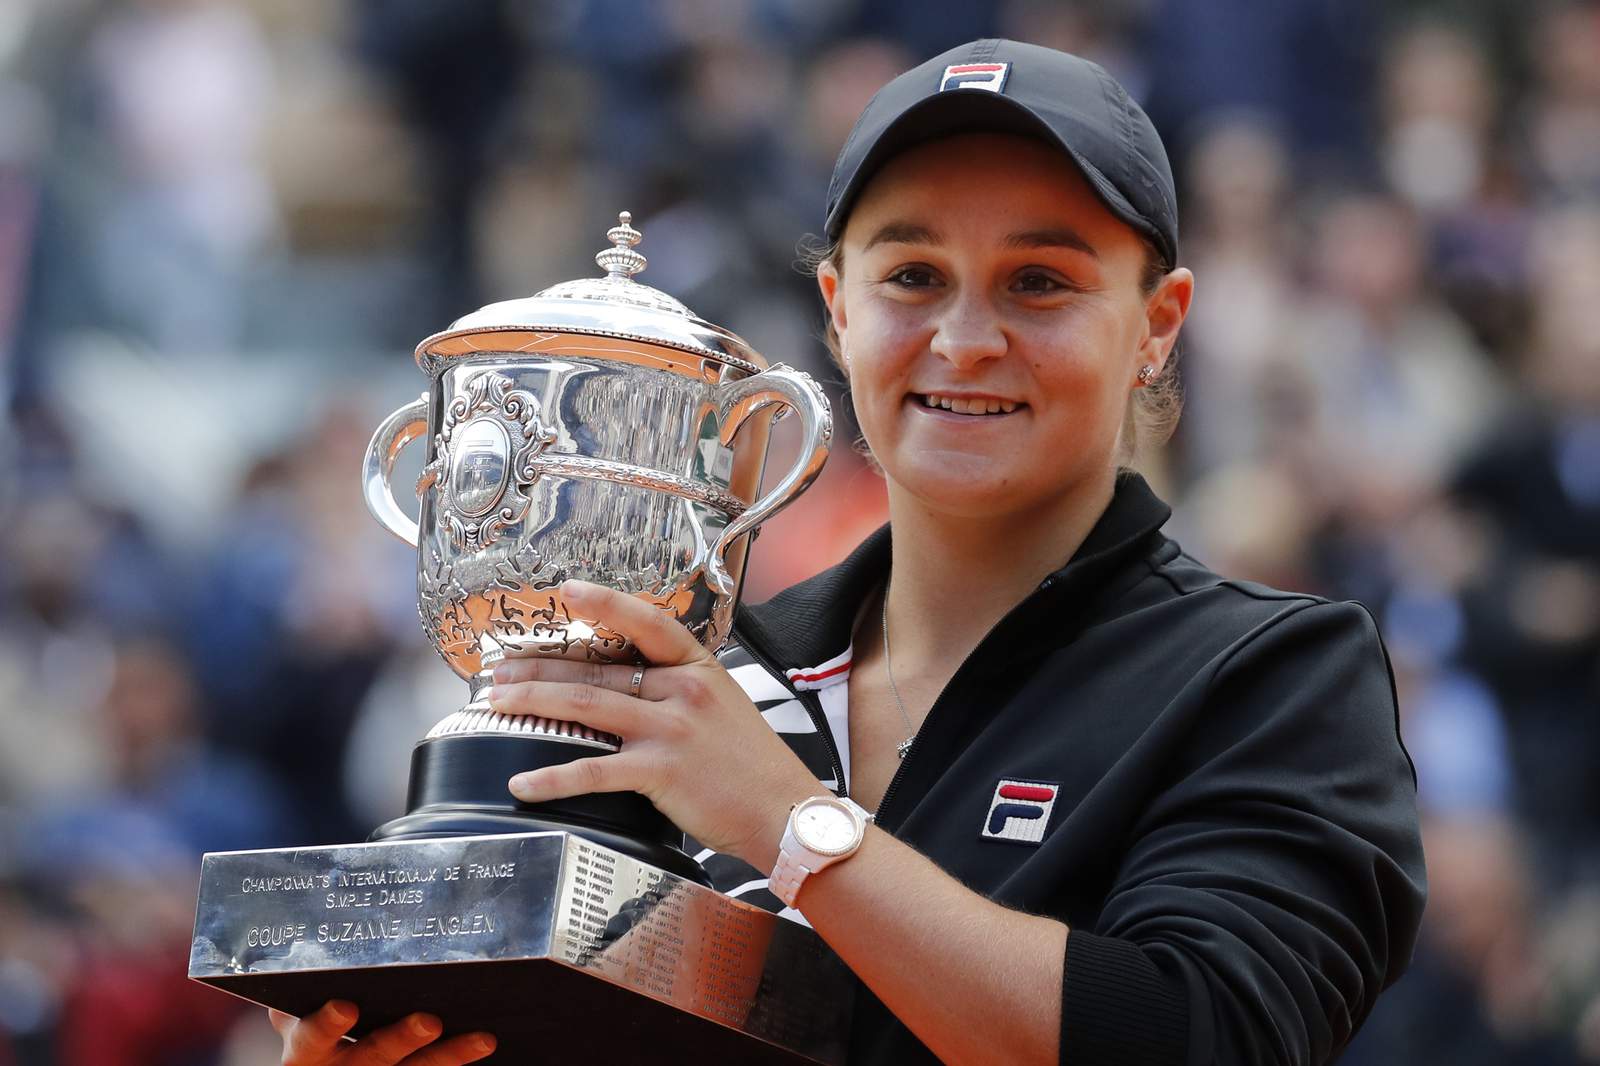 Top-ranked Barty pulls out of US Open, citing travel risks